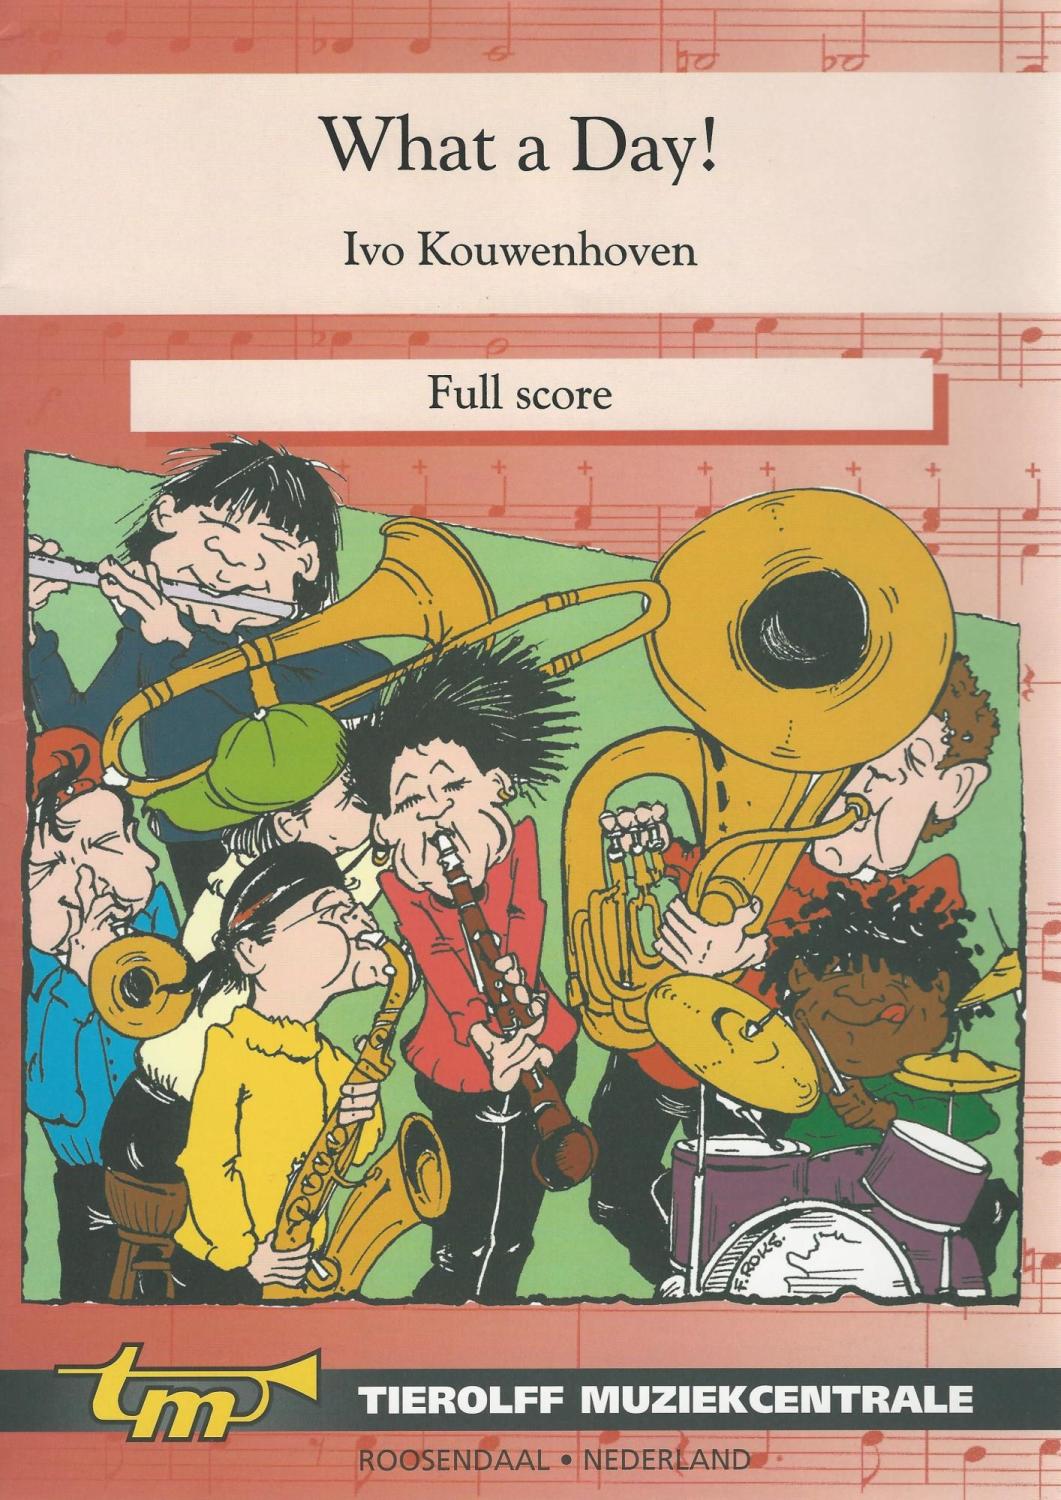 What a Day! for Young Band - Ivo Kouwenhoven